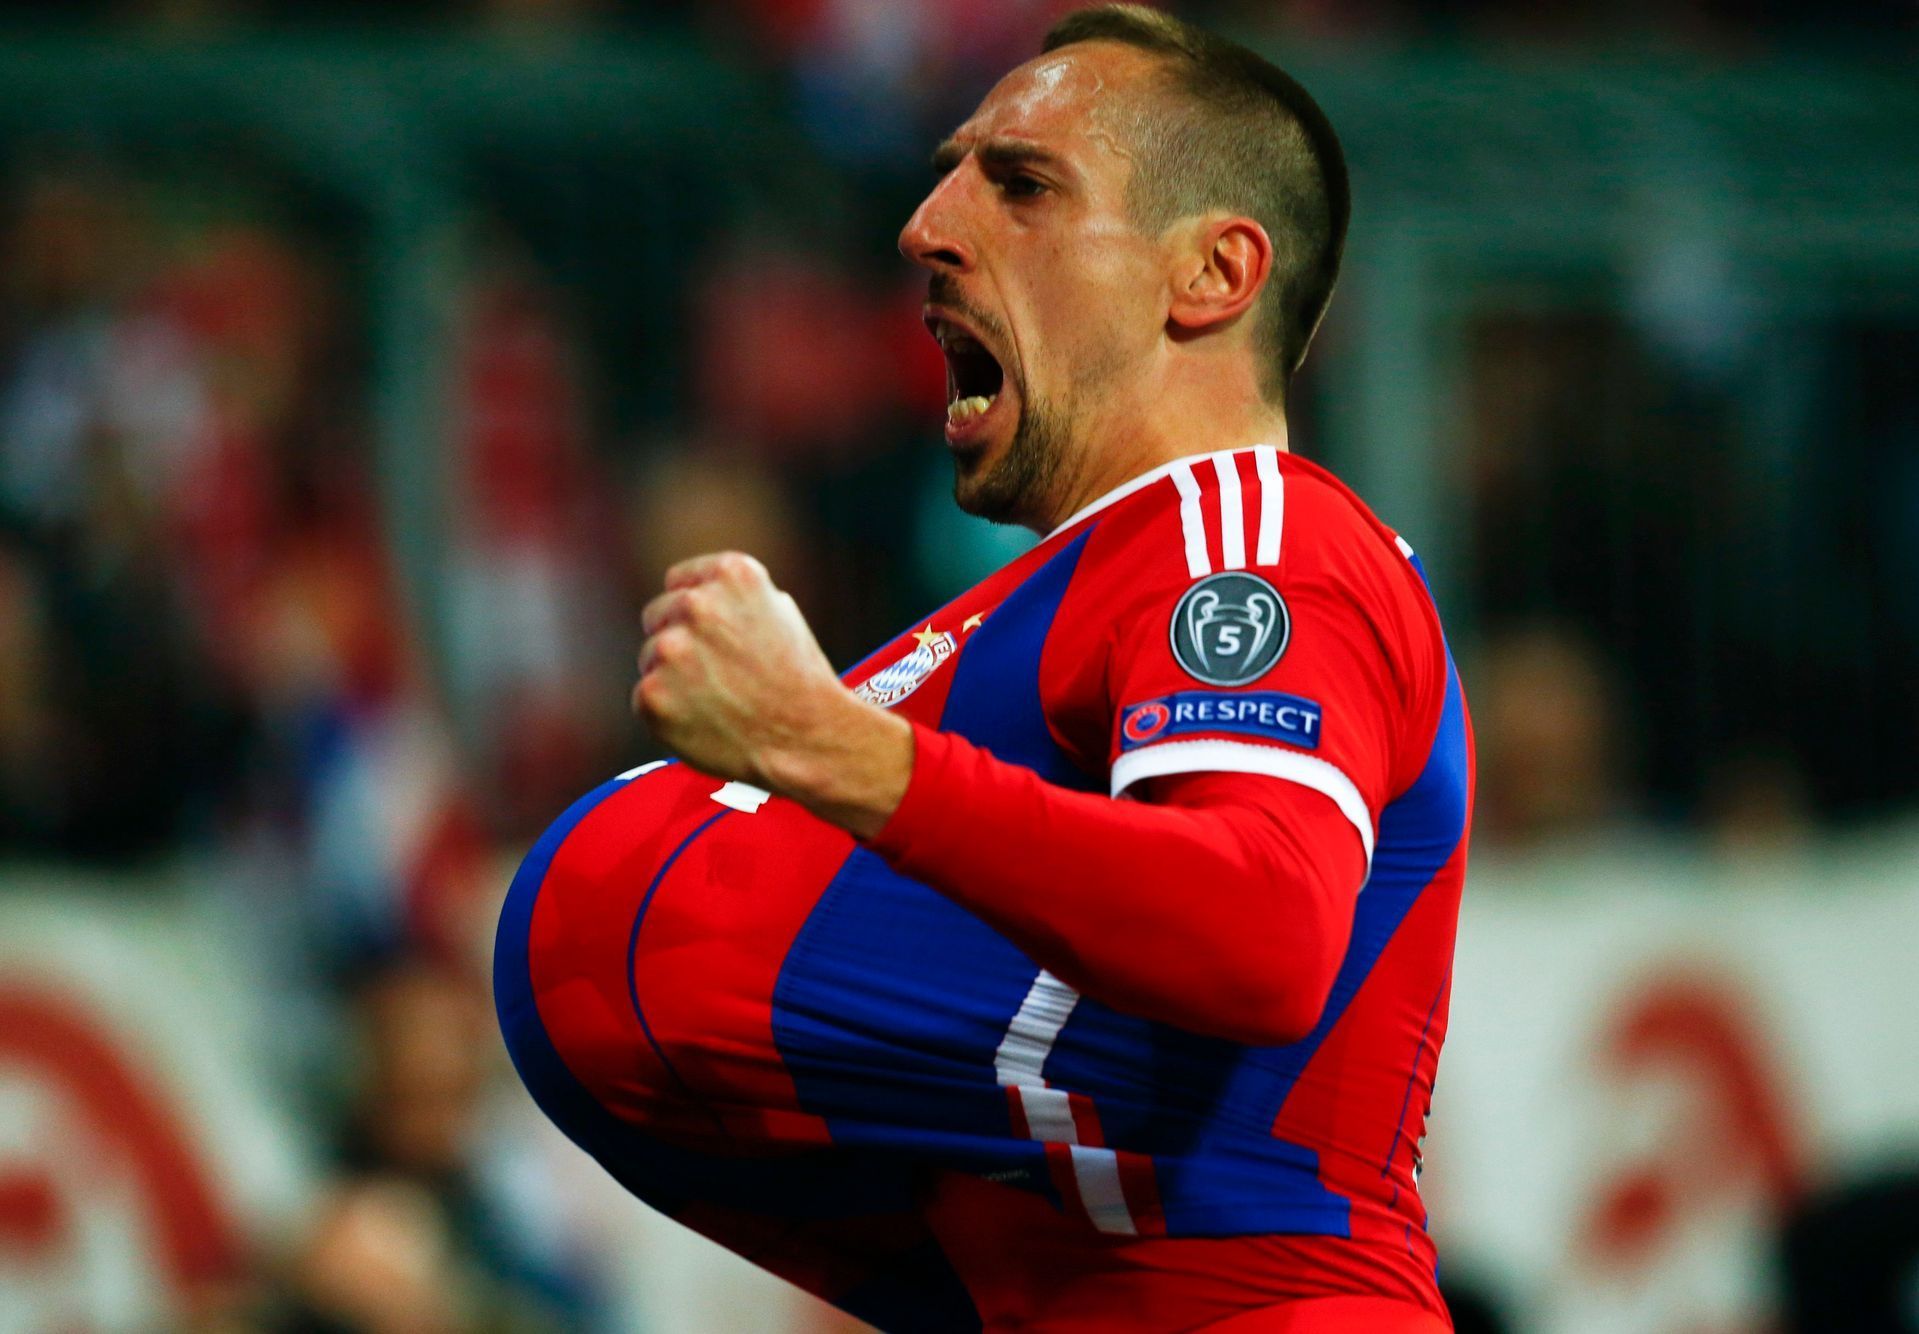 Bayern Munich's Ribery celebrates after scoring a goal against Shakhtar Donetsk during their Champions League Round of 16 second leg soccer match in Munich